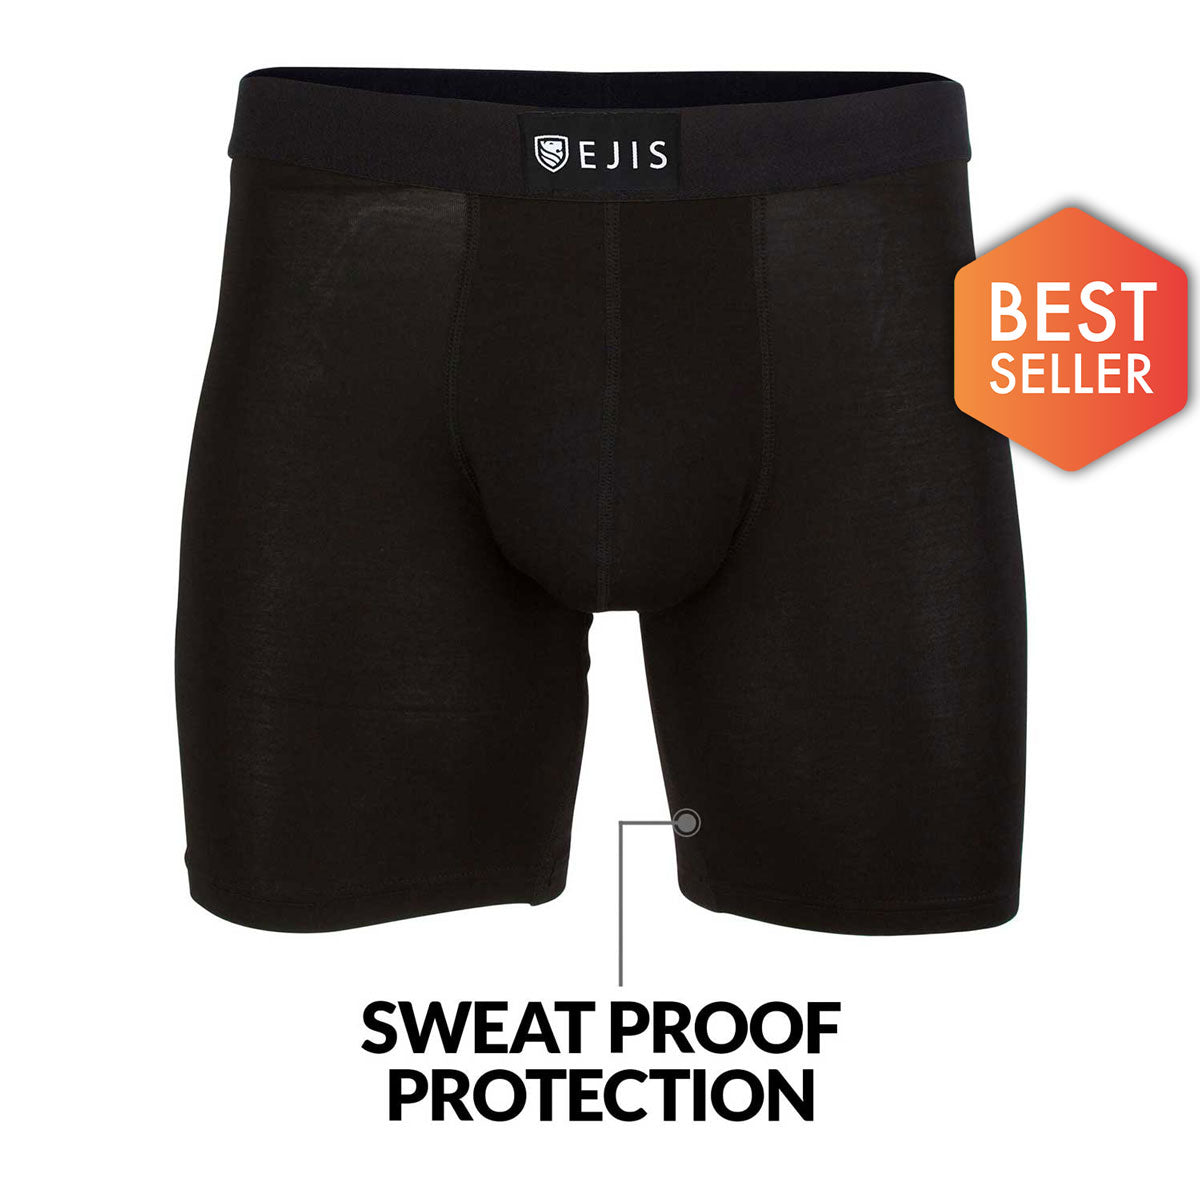 Ejis Sweat Proof Boxer Briefs 